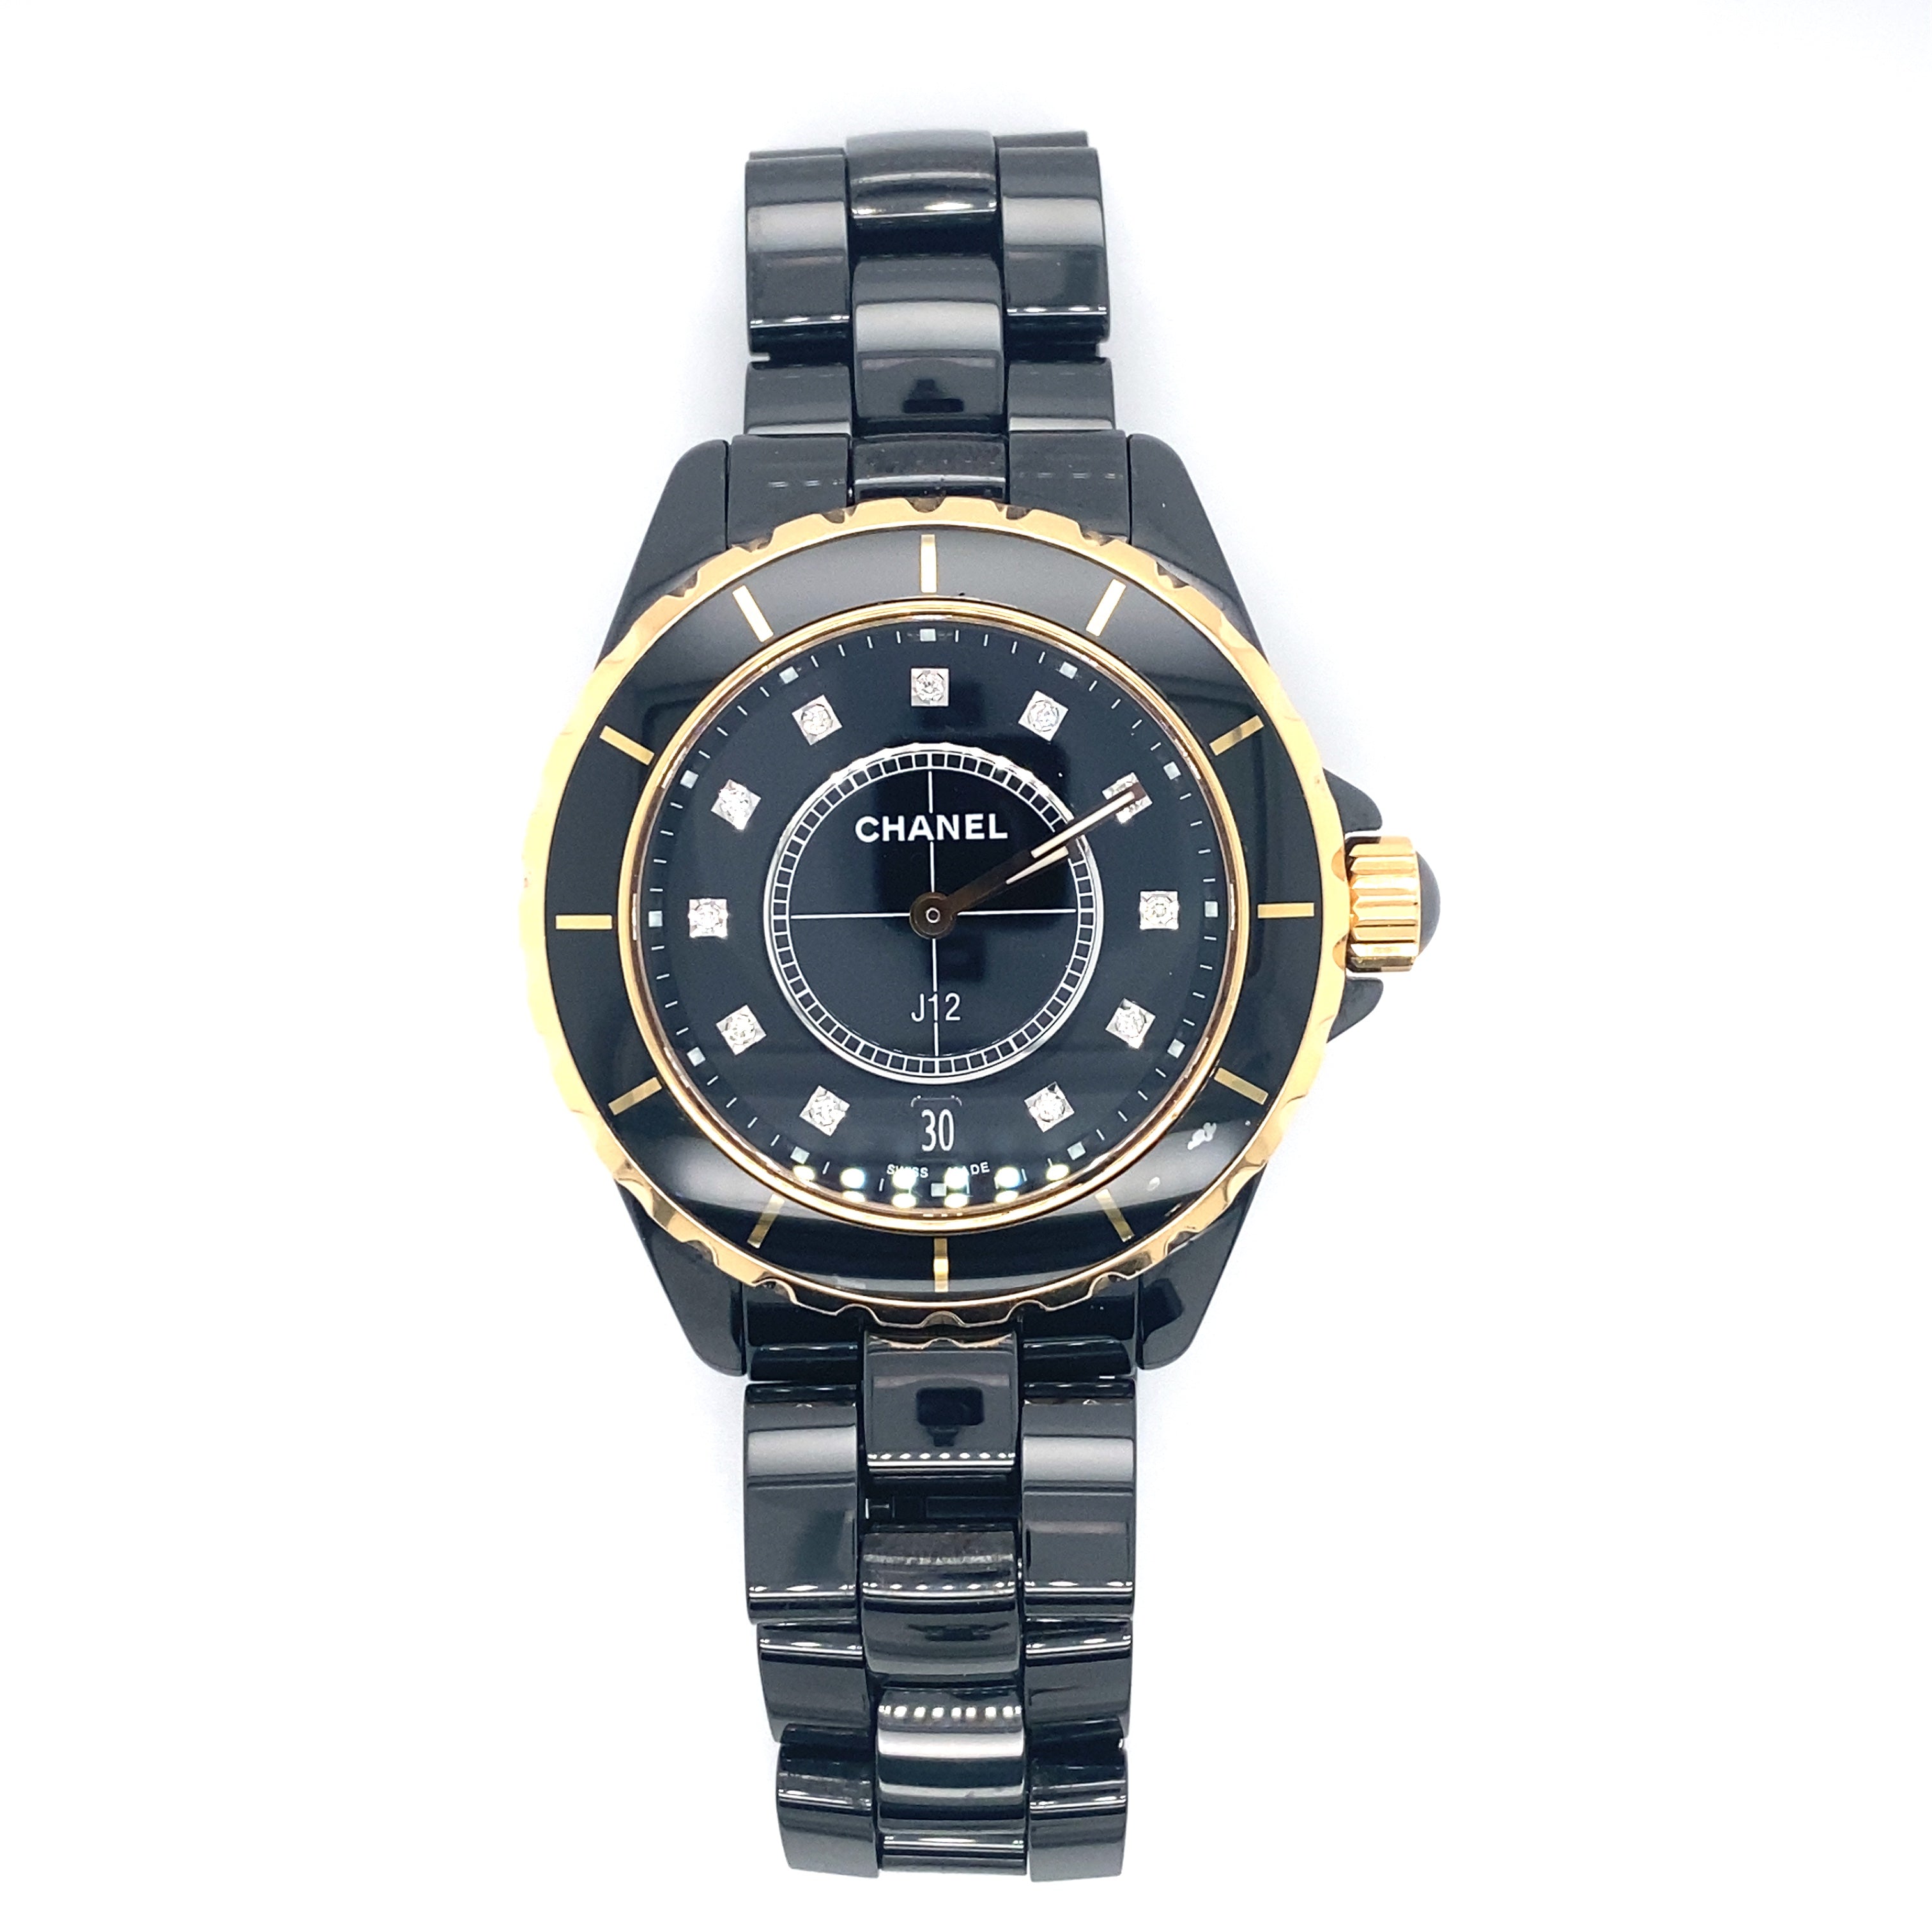 Authenticating the Chanel J12 Watch - Academy by FASHIONPHILE